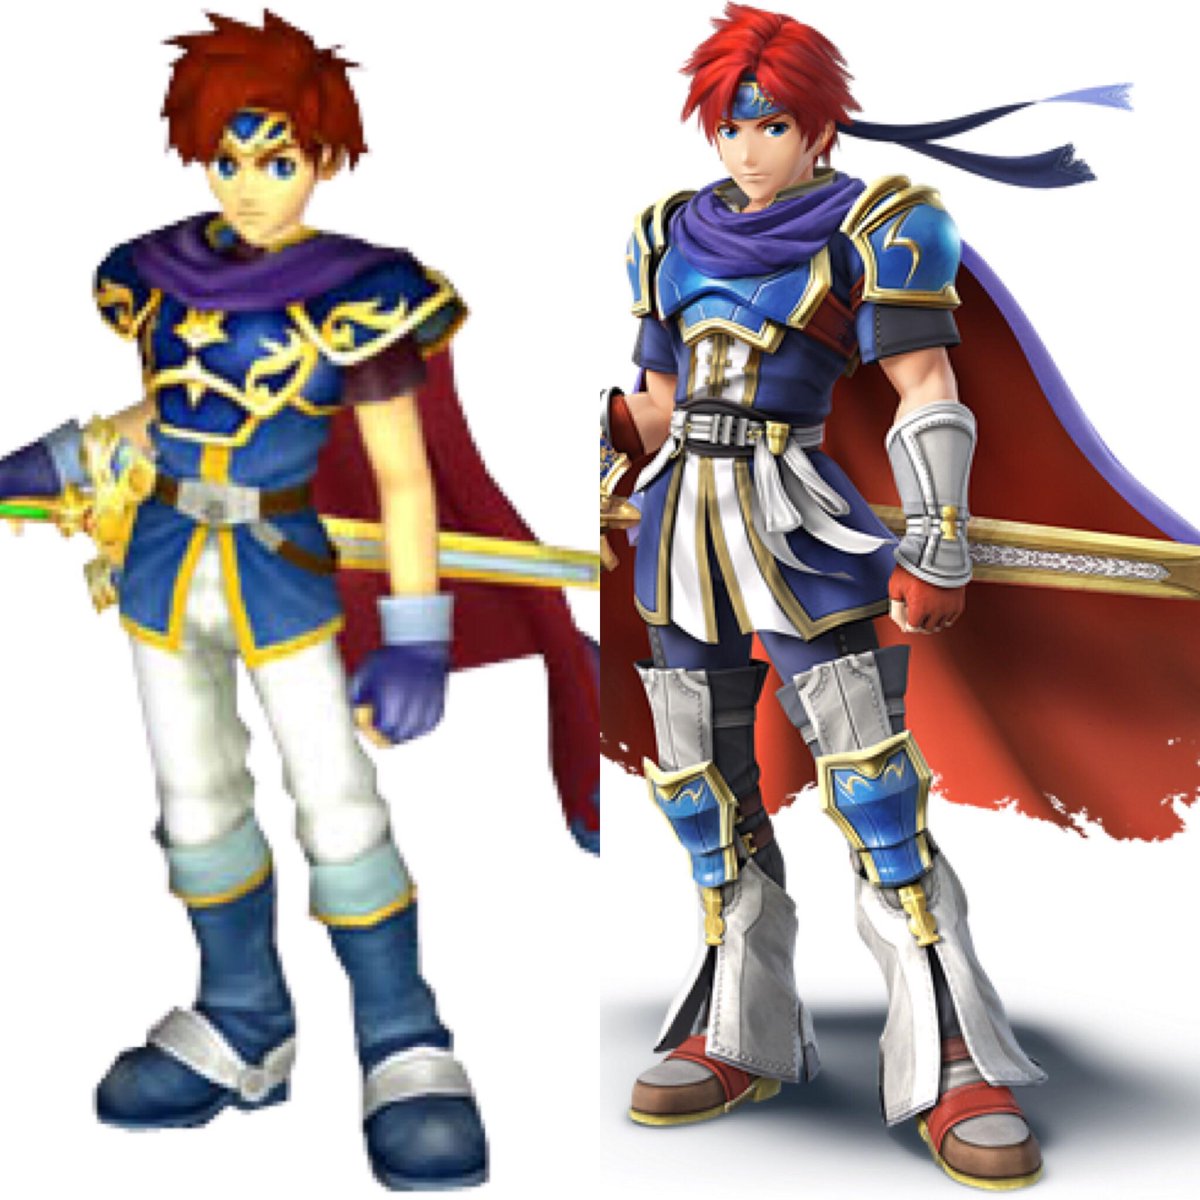 Thinking about Roy's glow up from Smash Bros Melee to Smash Bros for 3...